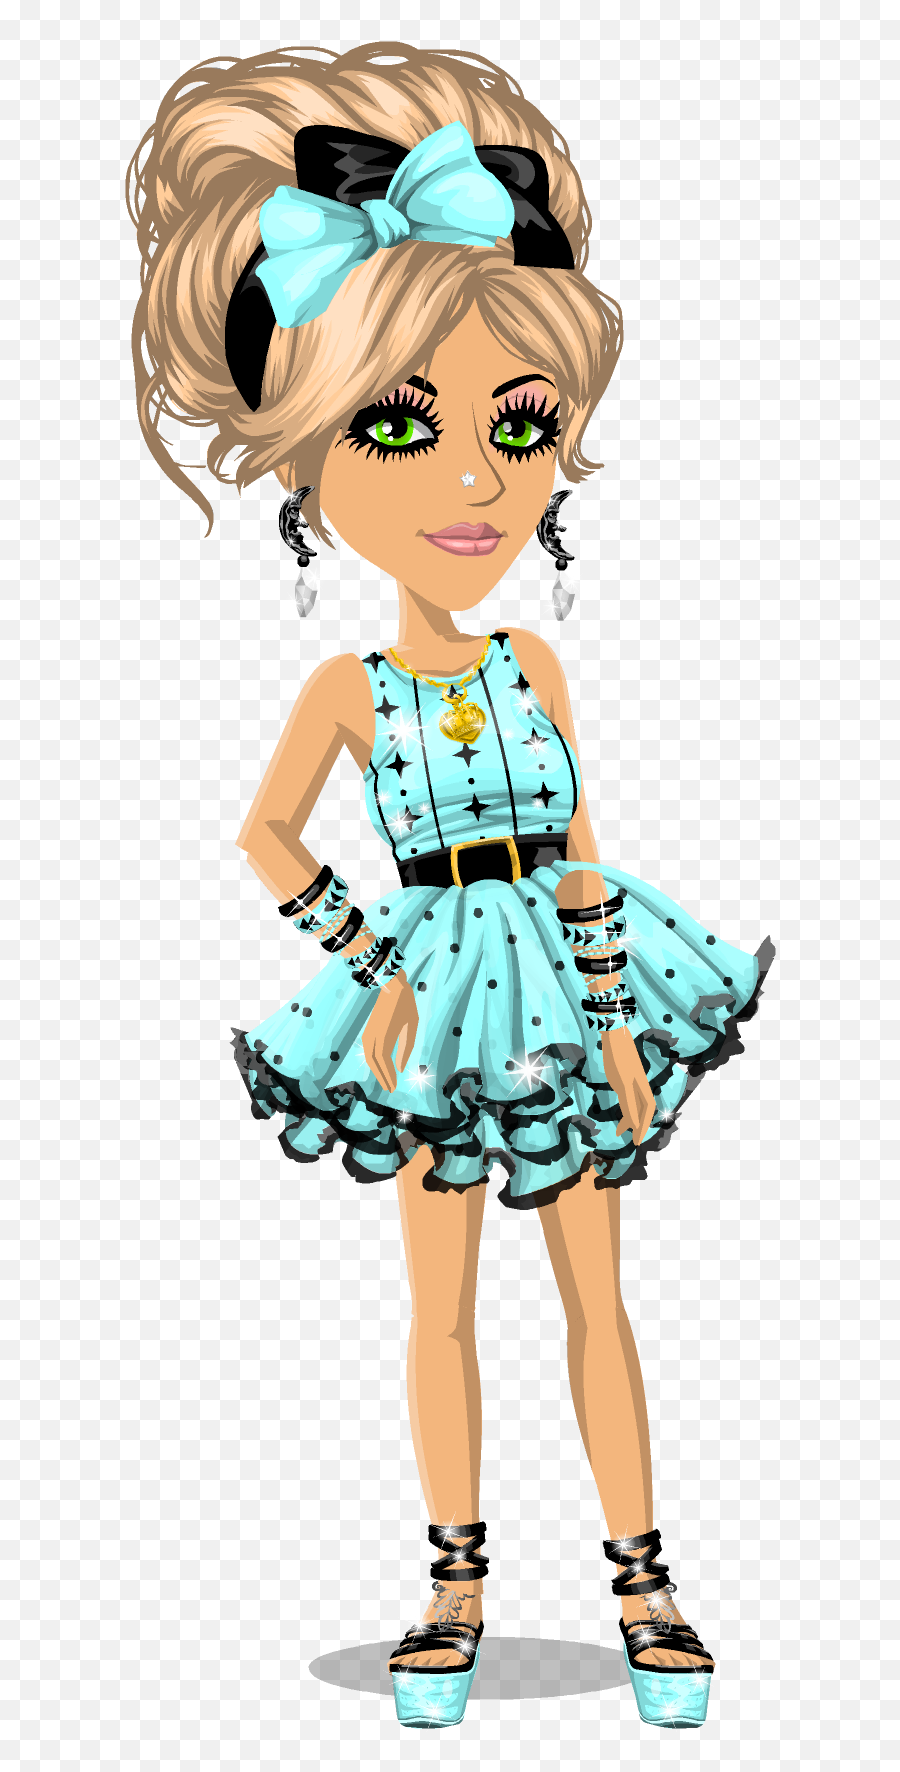 Moviestarplanet Movie Stars - Msp Outfits Emoji,How To Use The Emojis That Are For Diamonds On Msp